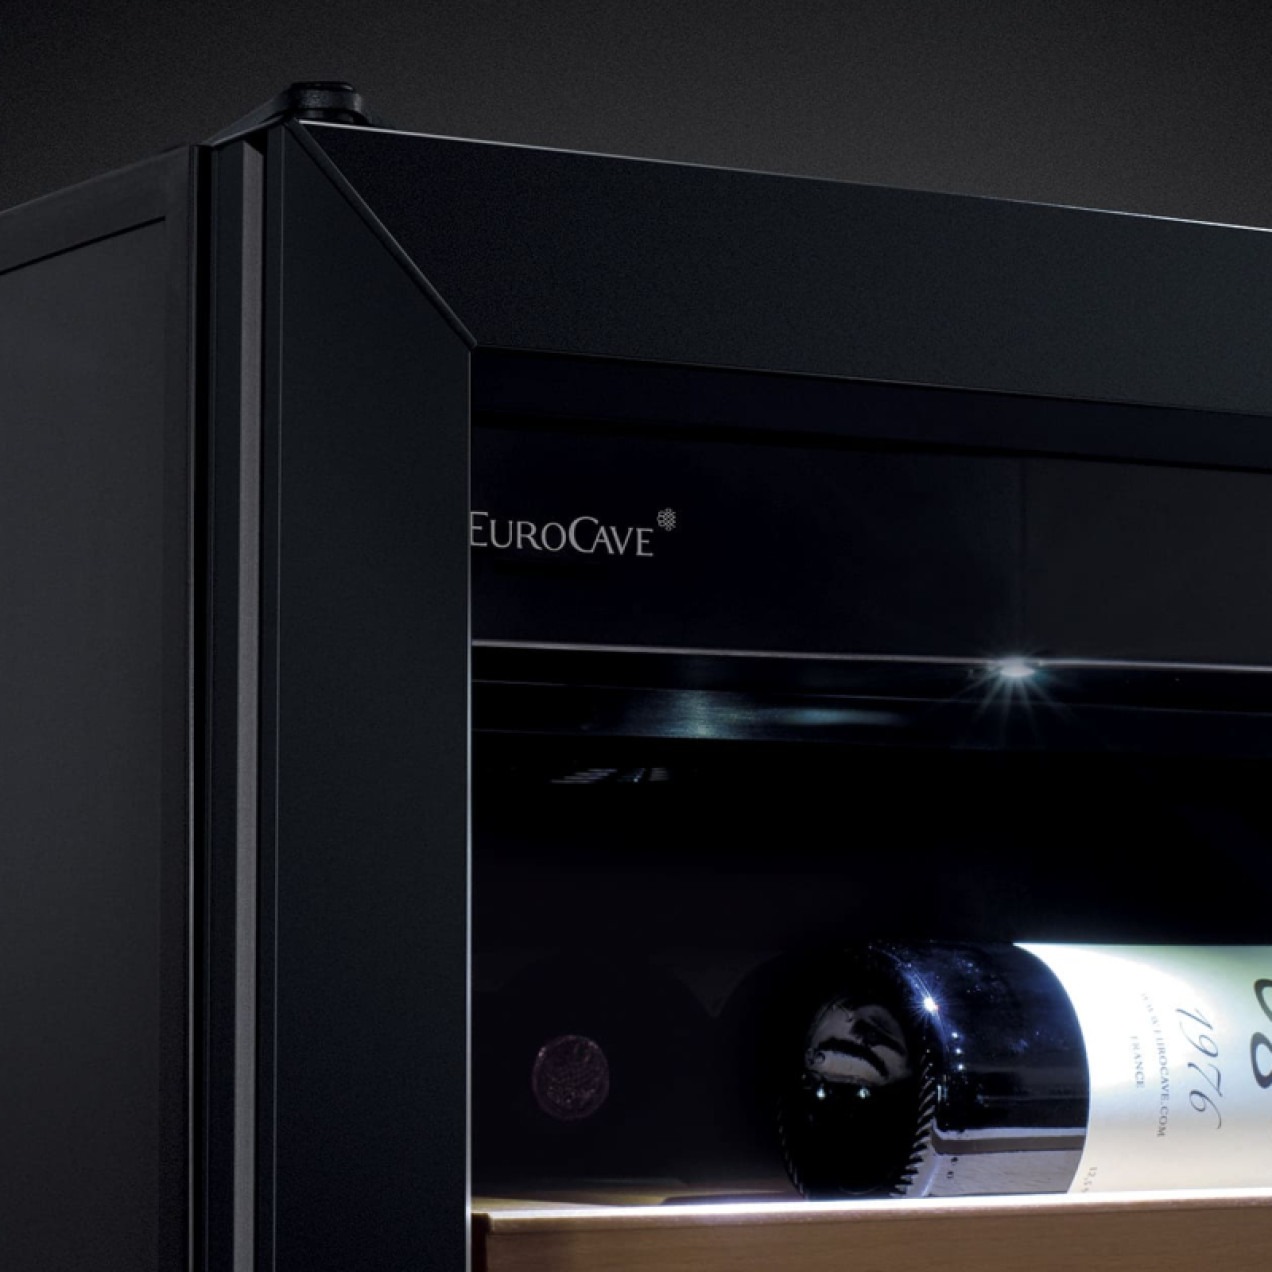 Enhancement of wine bottles in the cooler with white interior lighting.